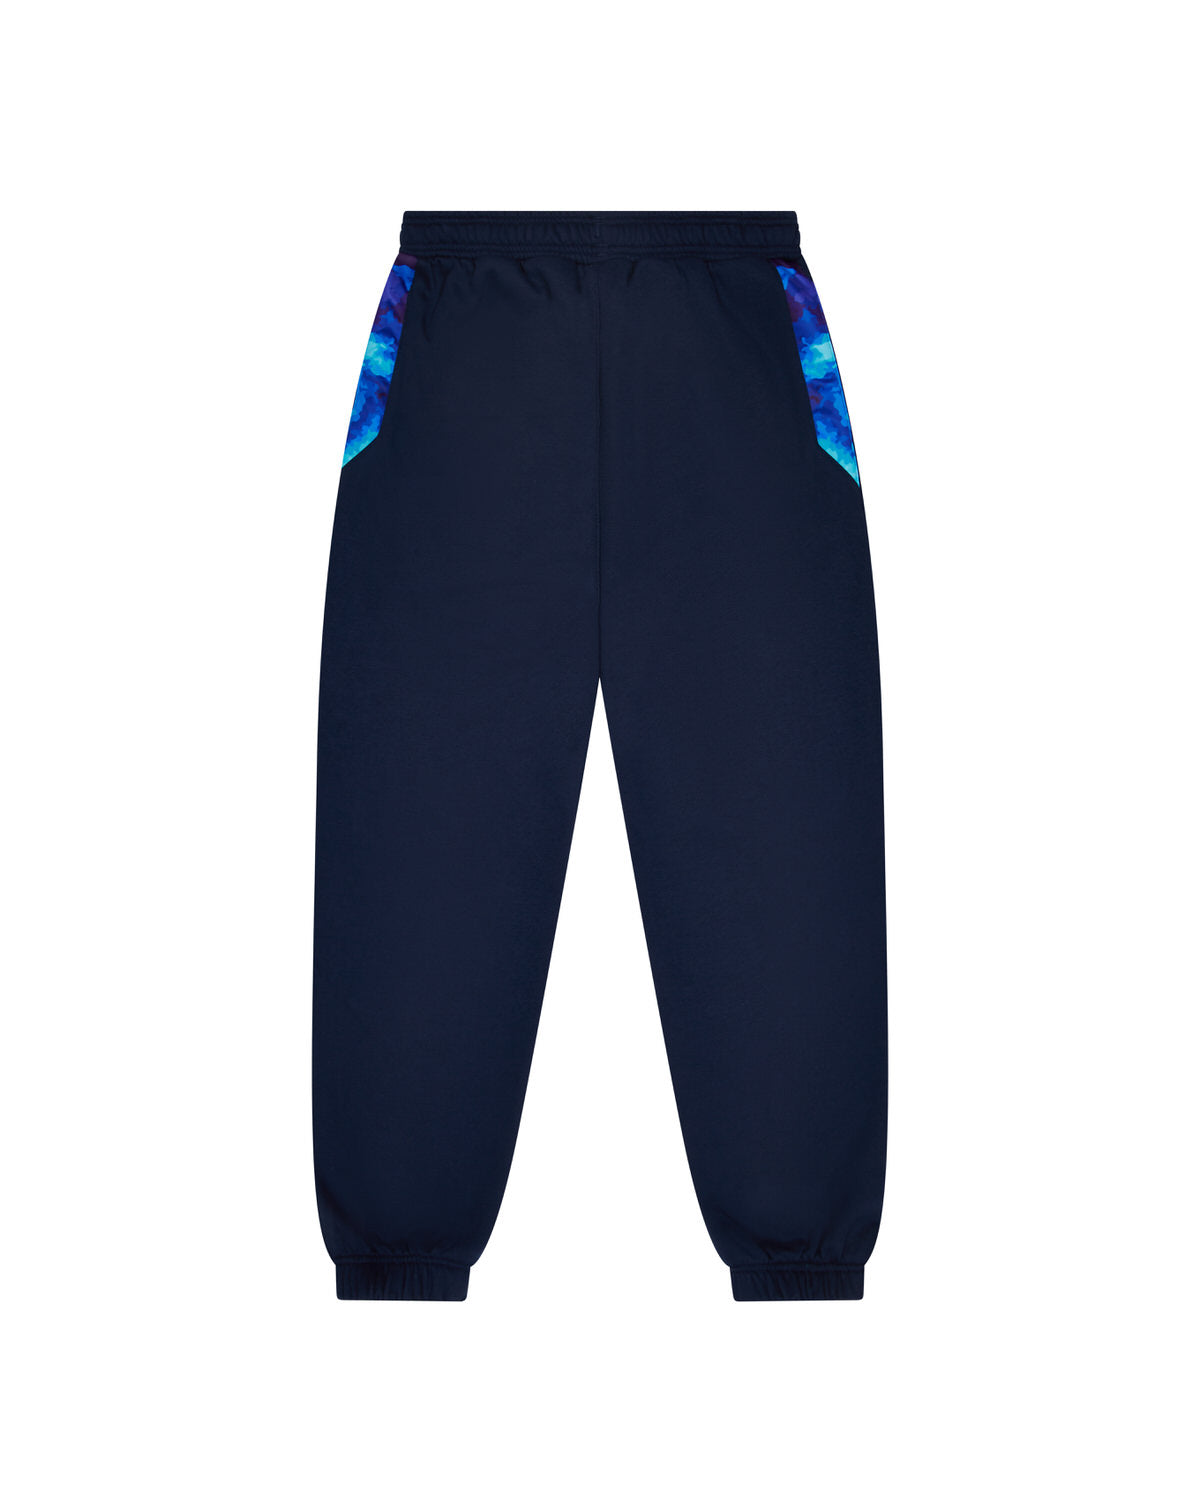 Leicester Tigers - NMD Sweatpant - Navy